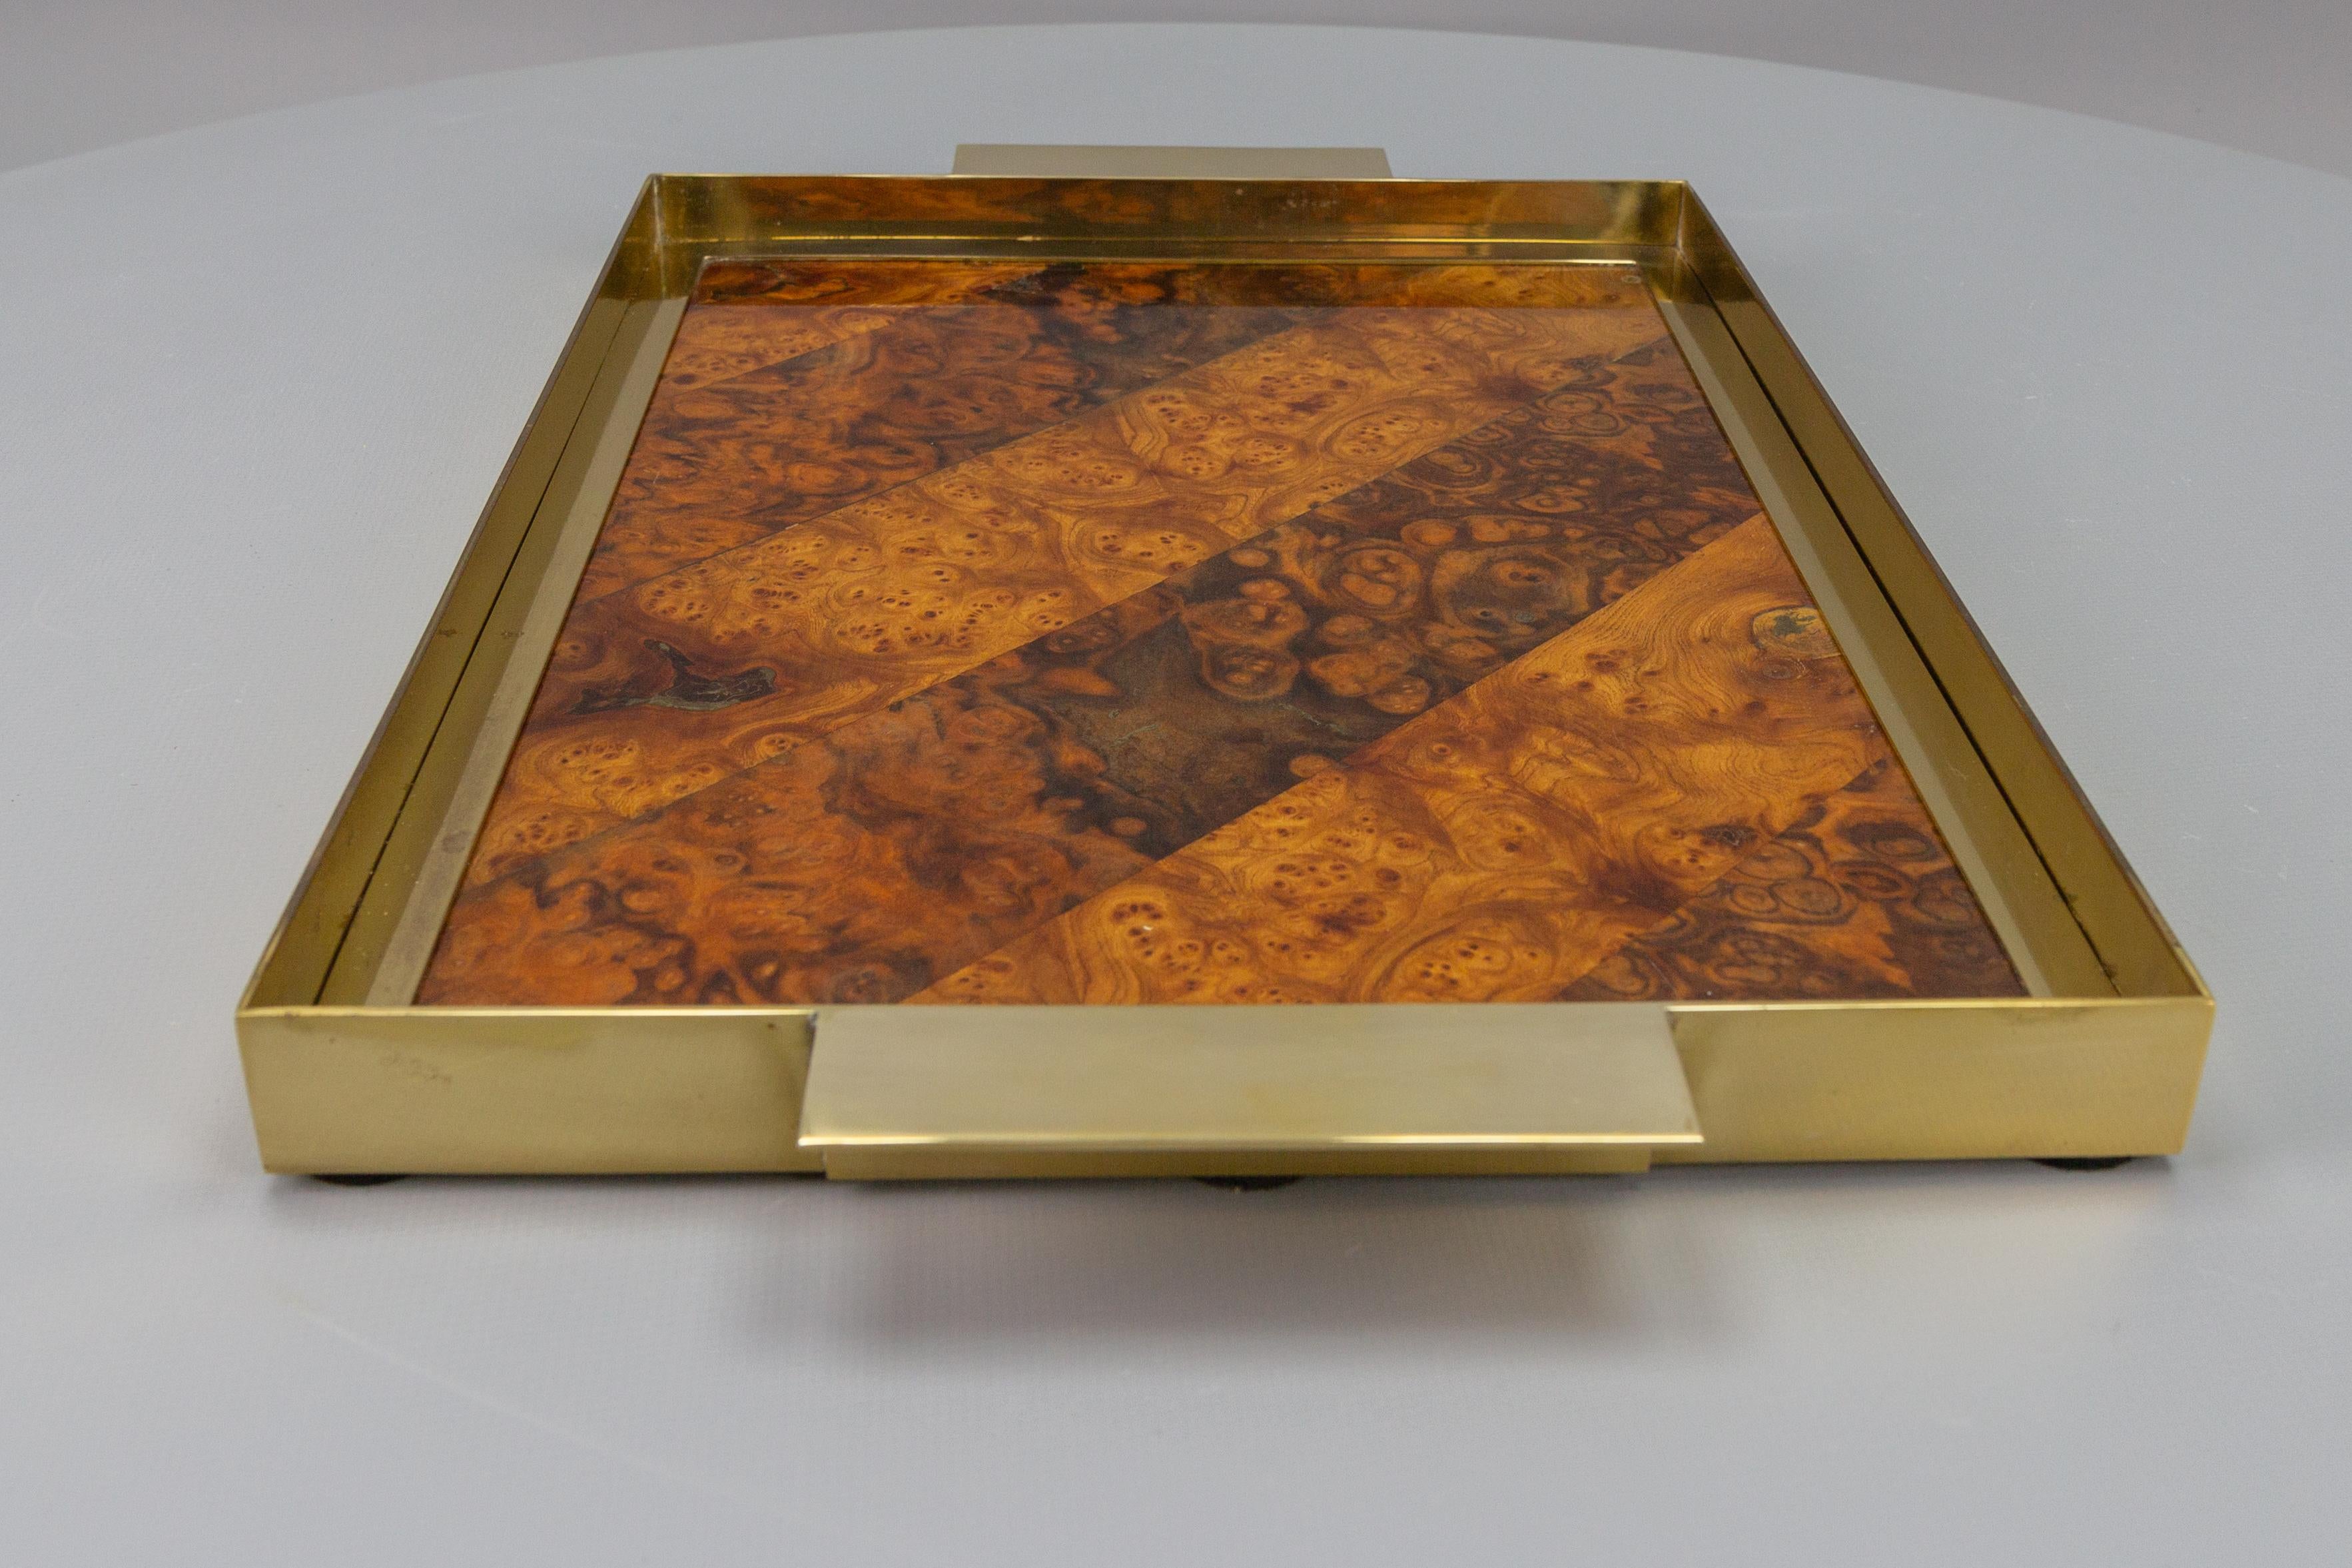 Mid-Century Brown and Golden Color Serving Tray with Burr Wood Effect, 1960s For Sale 4